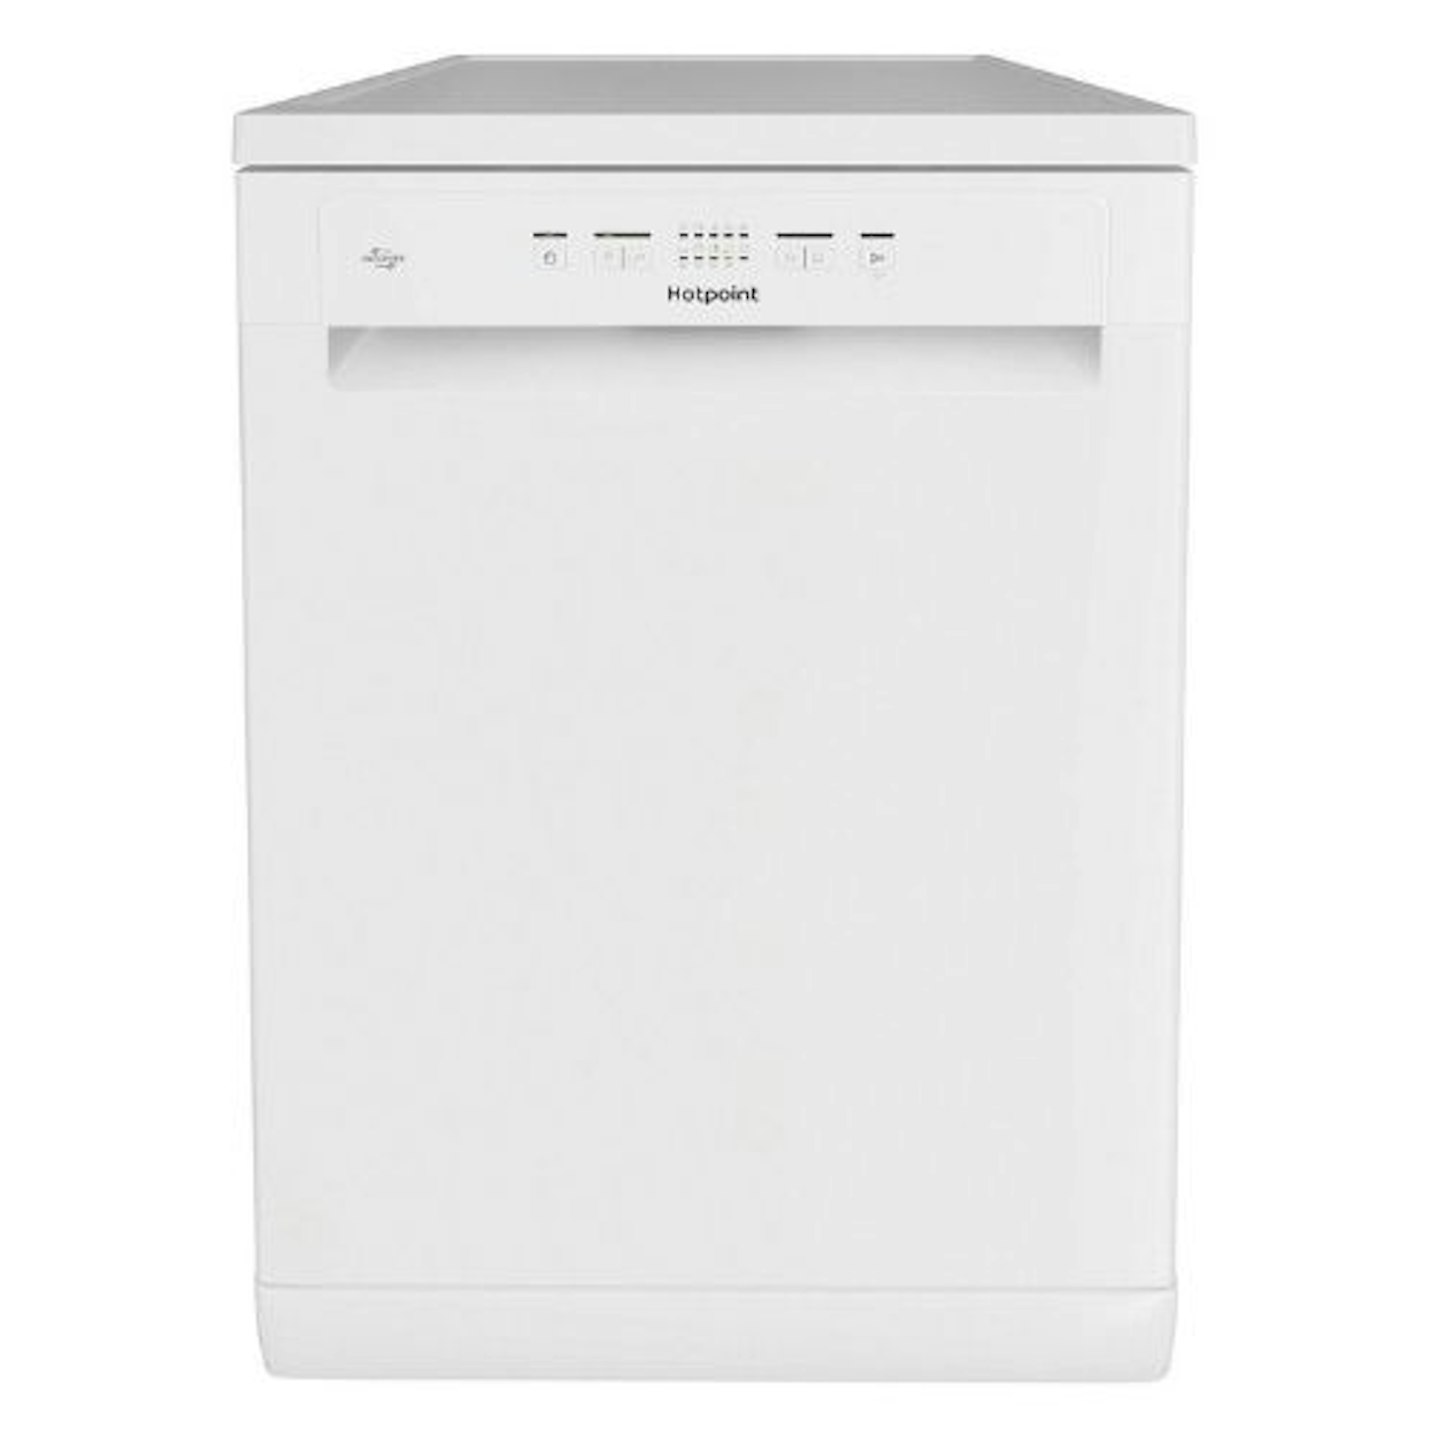 Hotpoint H2FH626 14-Place Dishwasher